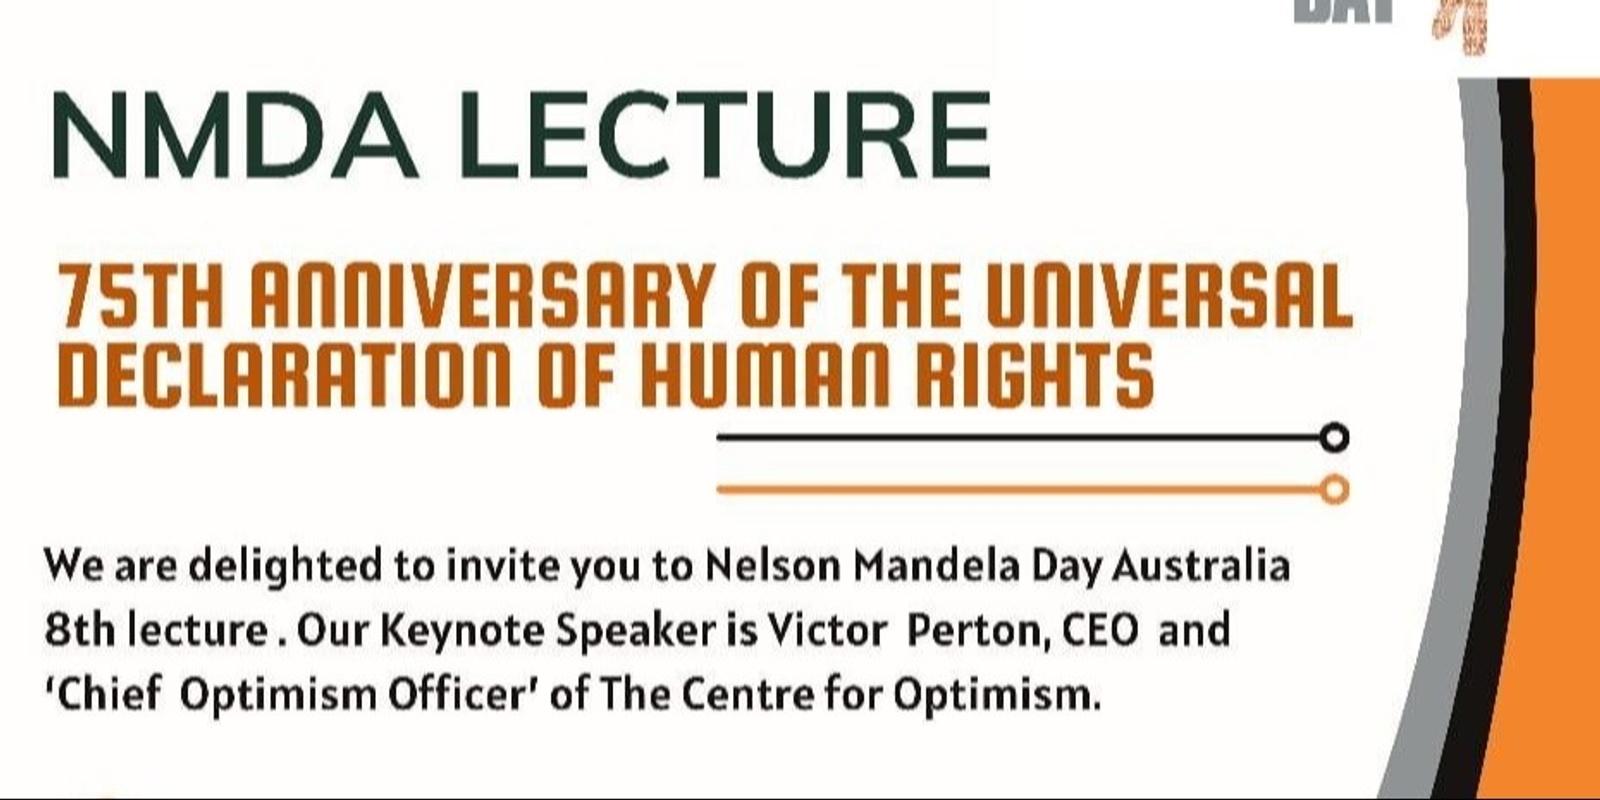 Banner image for Nelson Mandela Day Australia 75th Anniversary of the Universal Declaration of Human Rights